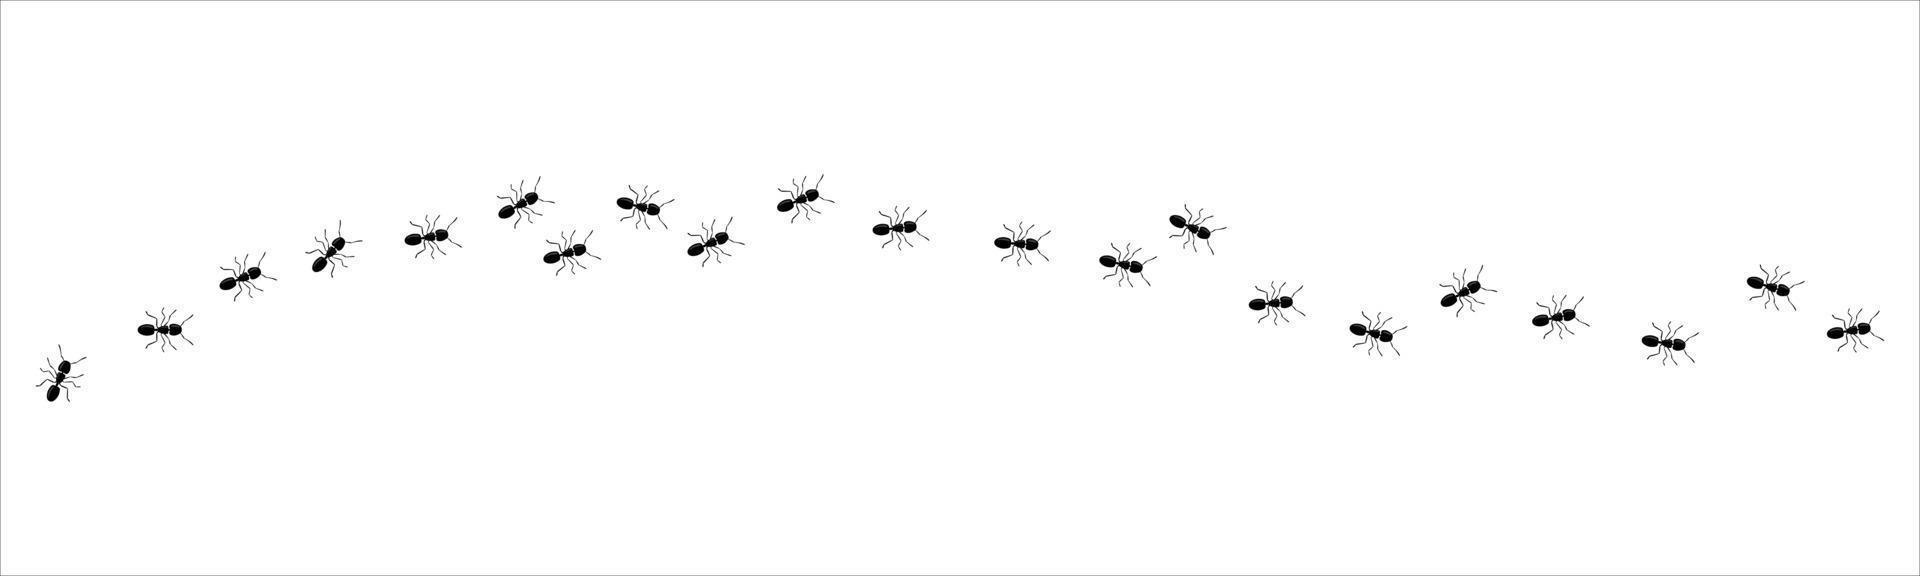 Ant trail. Ant column. Black insect silhouettes trip. Teamwork, hard work concept. vector